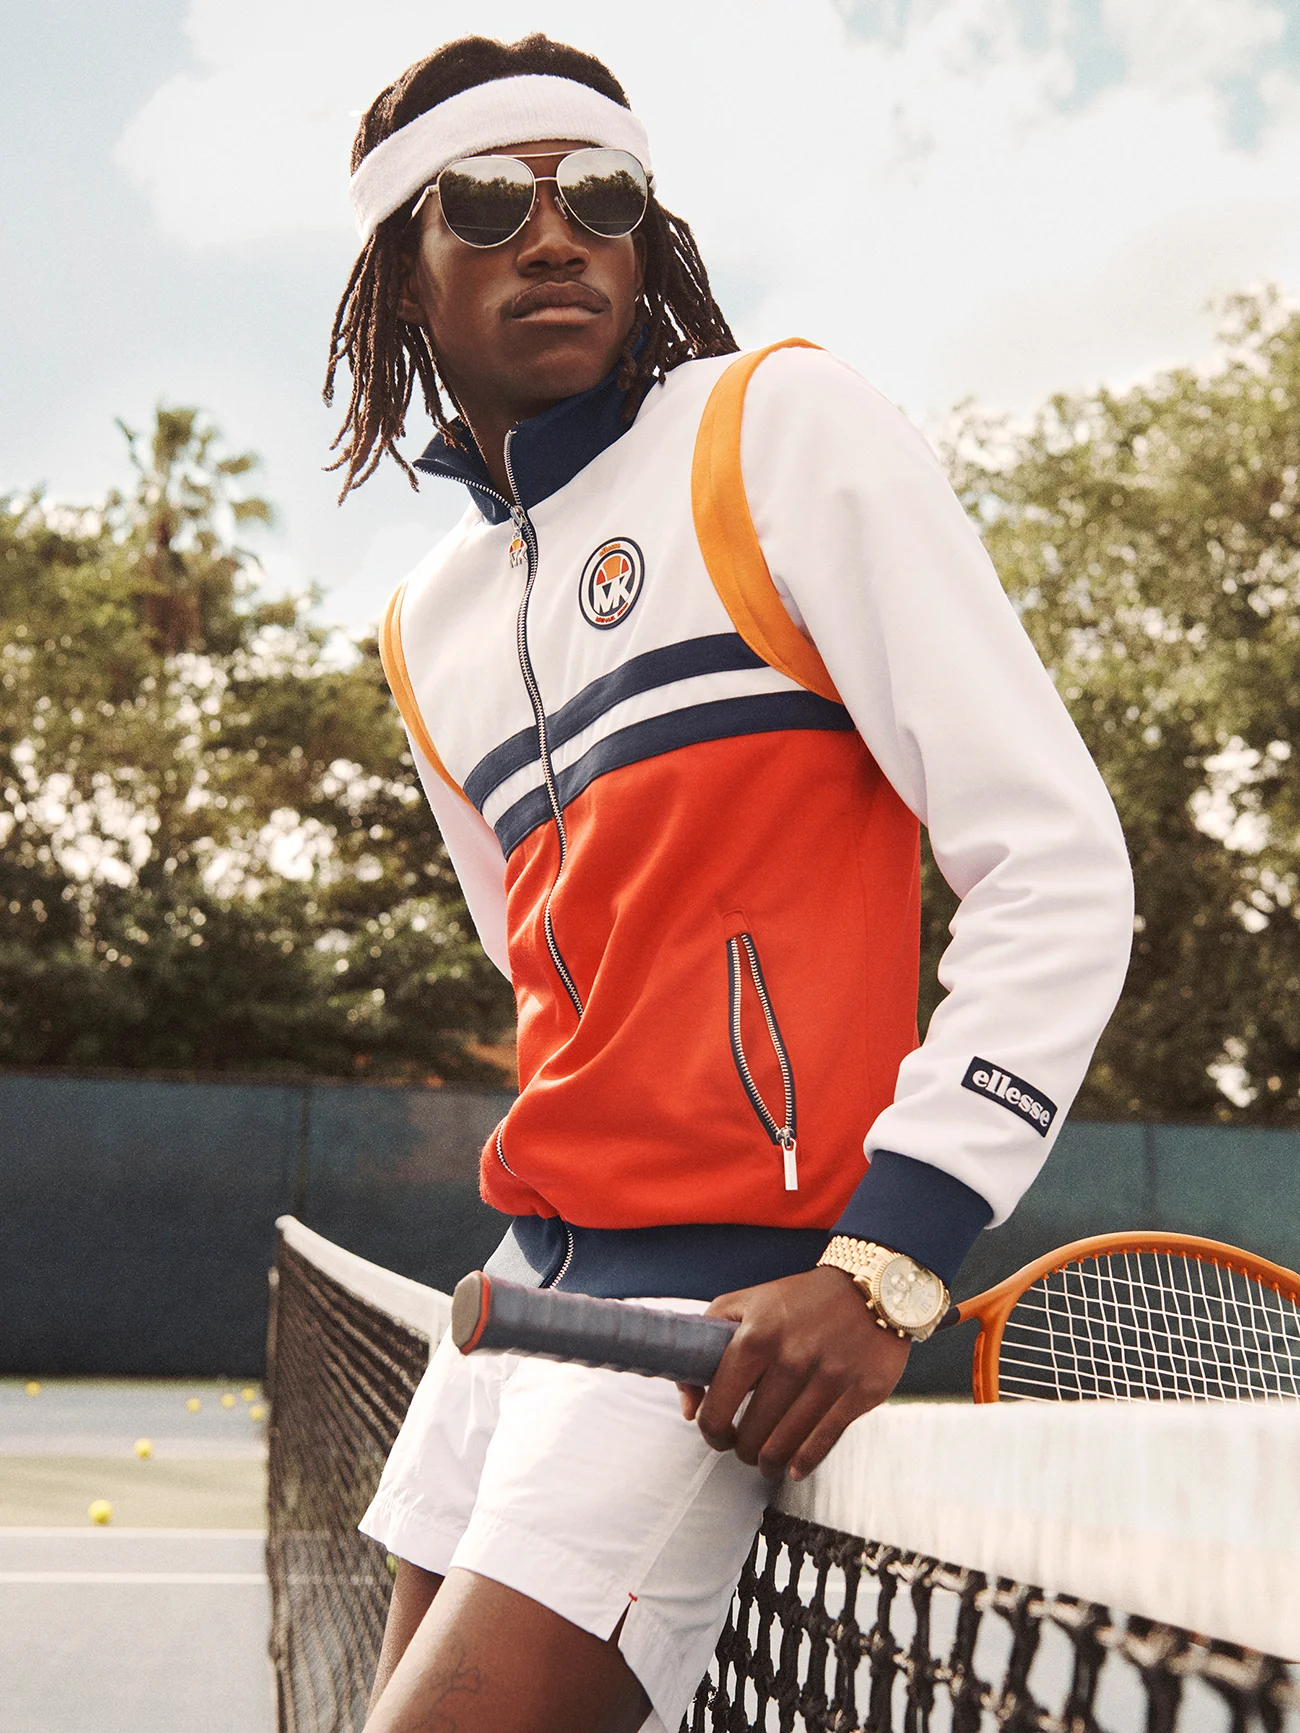 Michael Kors and ellesse team up to celebrate the athletic styles of the ’70s